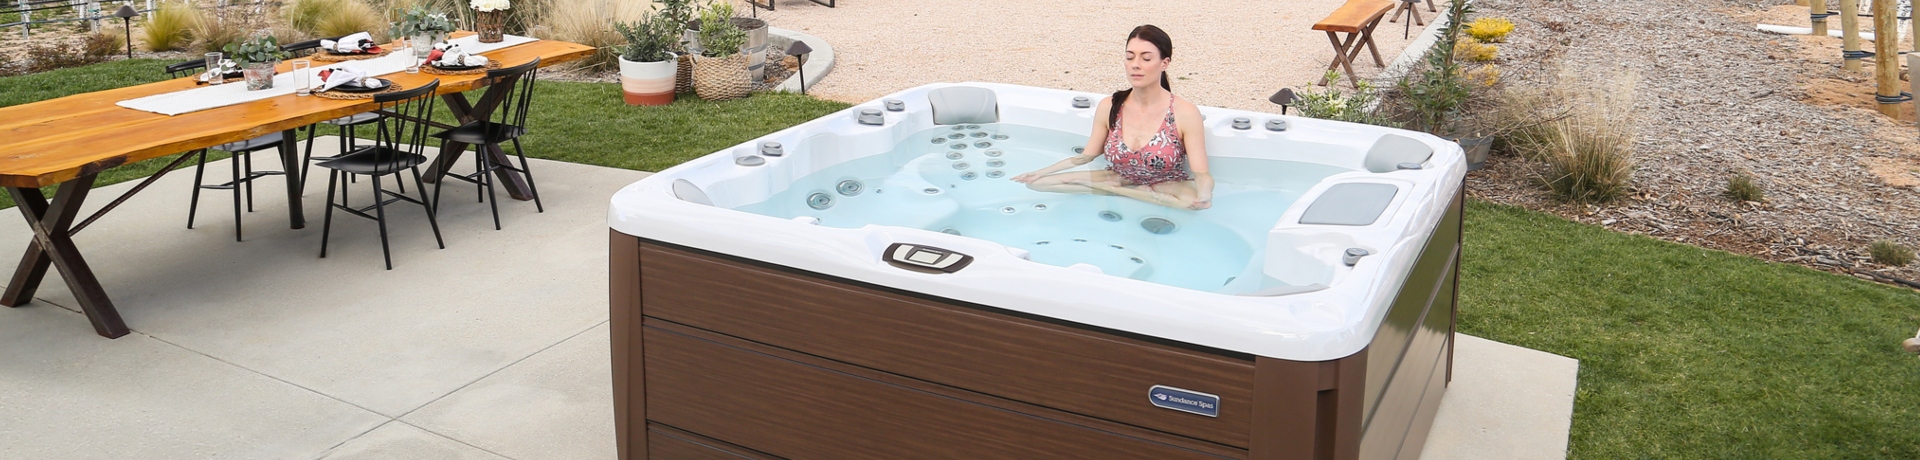 Can Hot Tubs Help You Sleep Better?Image